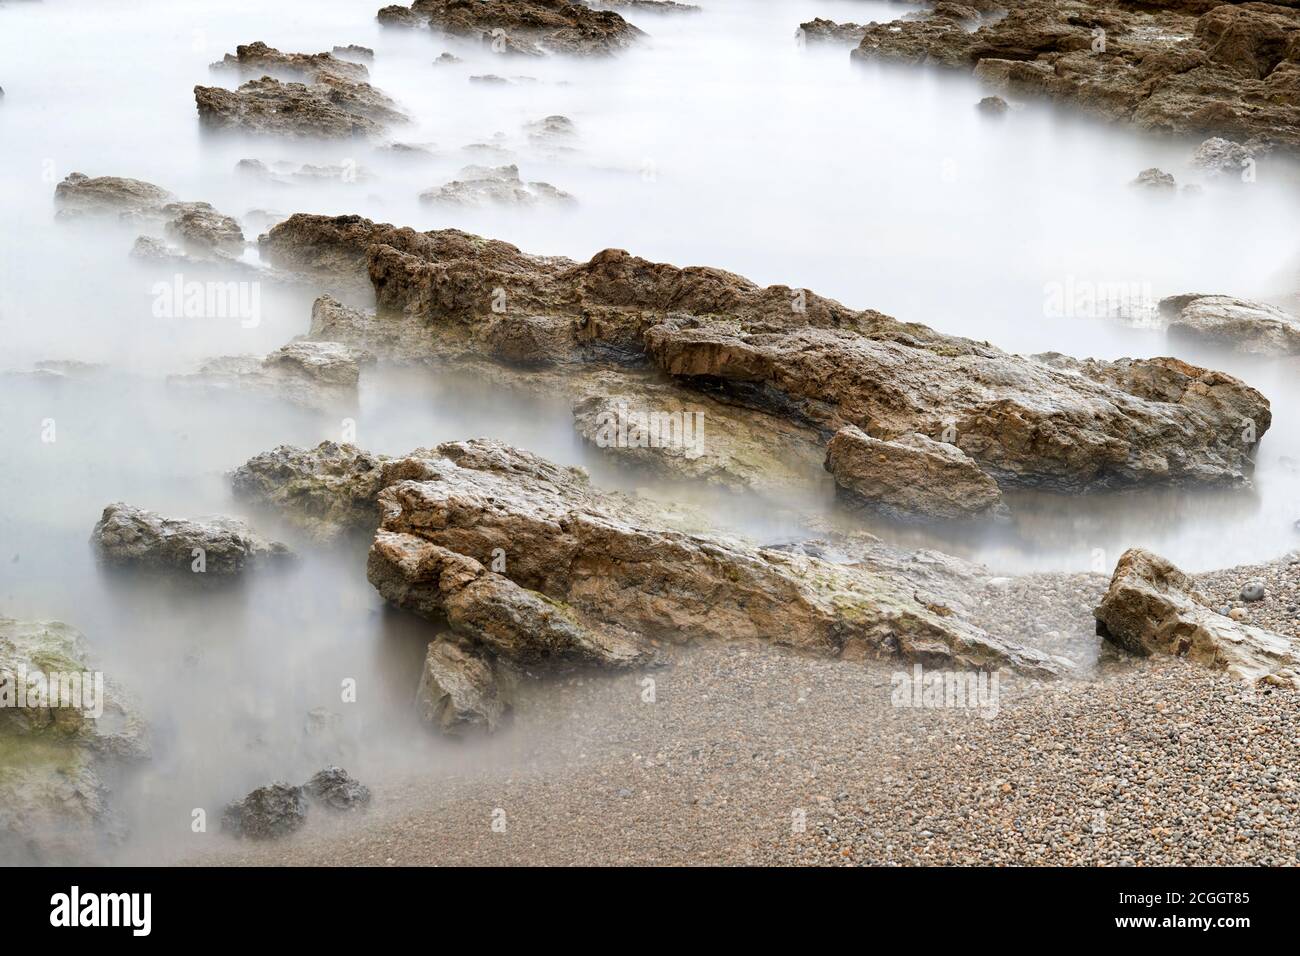 Long exposure photography with a neutral density filter. Beach in Asturias, Spain with a cloudy sunrise. Stock Photo